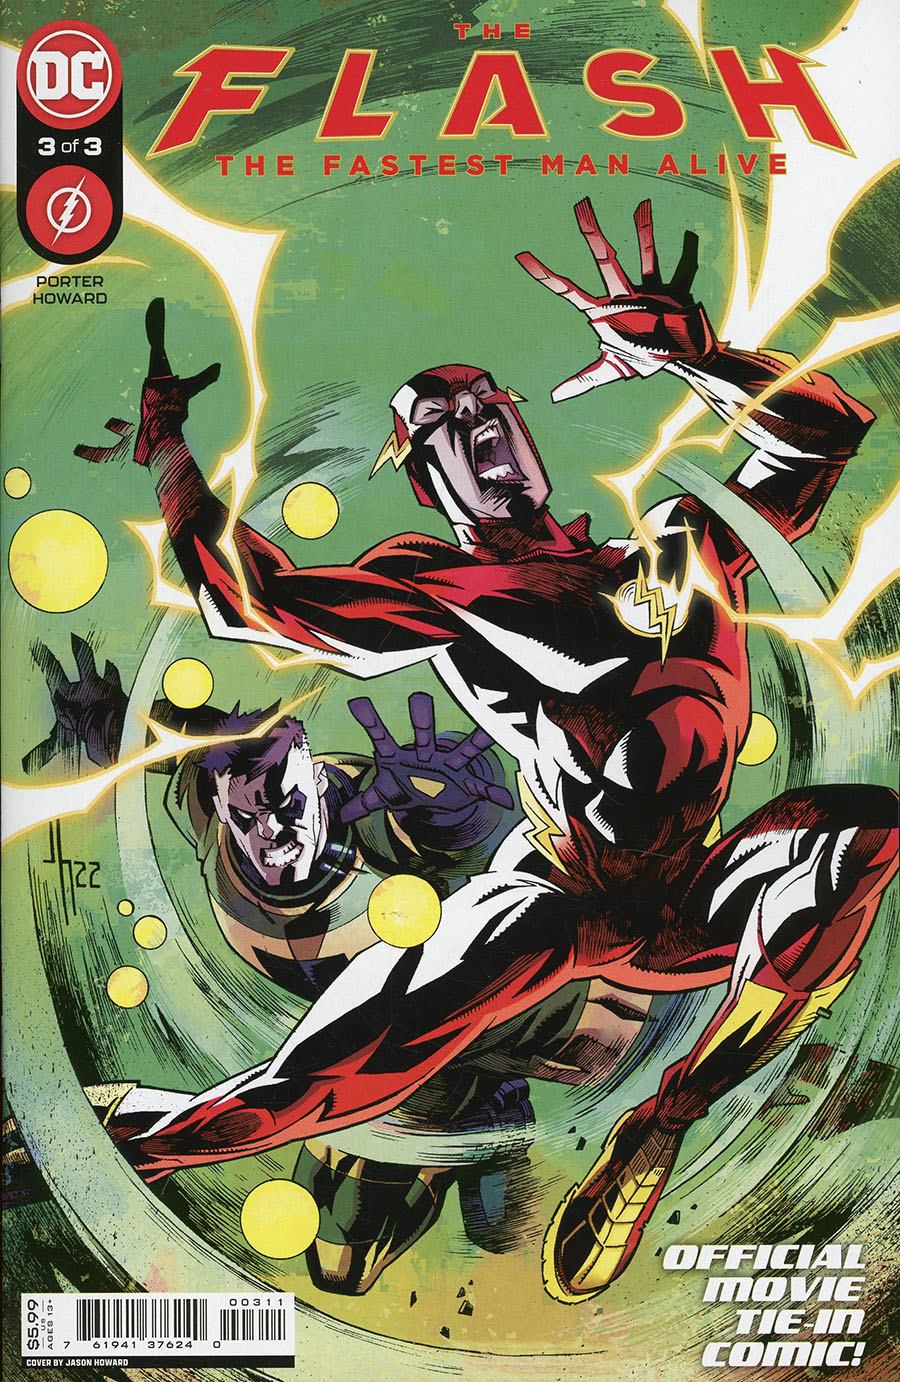 Flash The Fastest Man Alive Vol 2 #3 Cover A Regular Jason Howard Cover